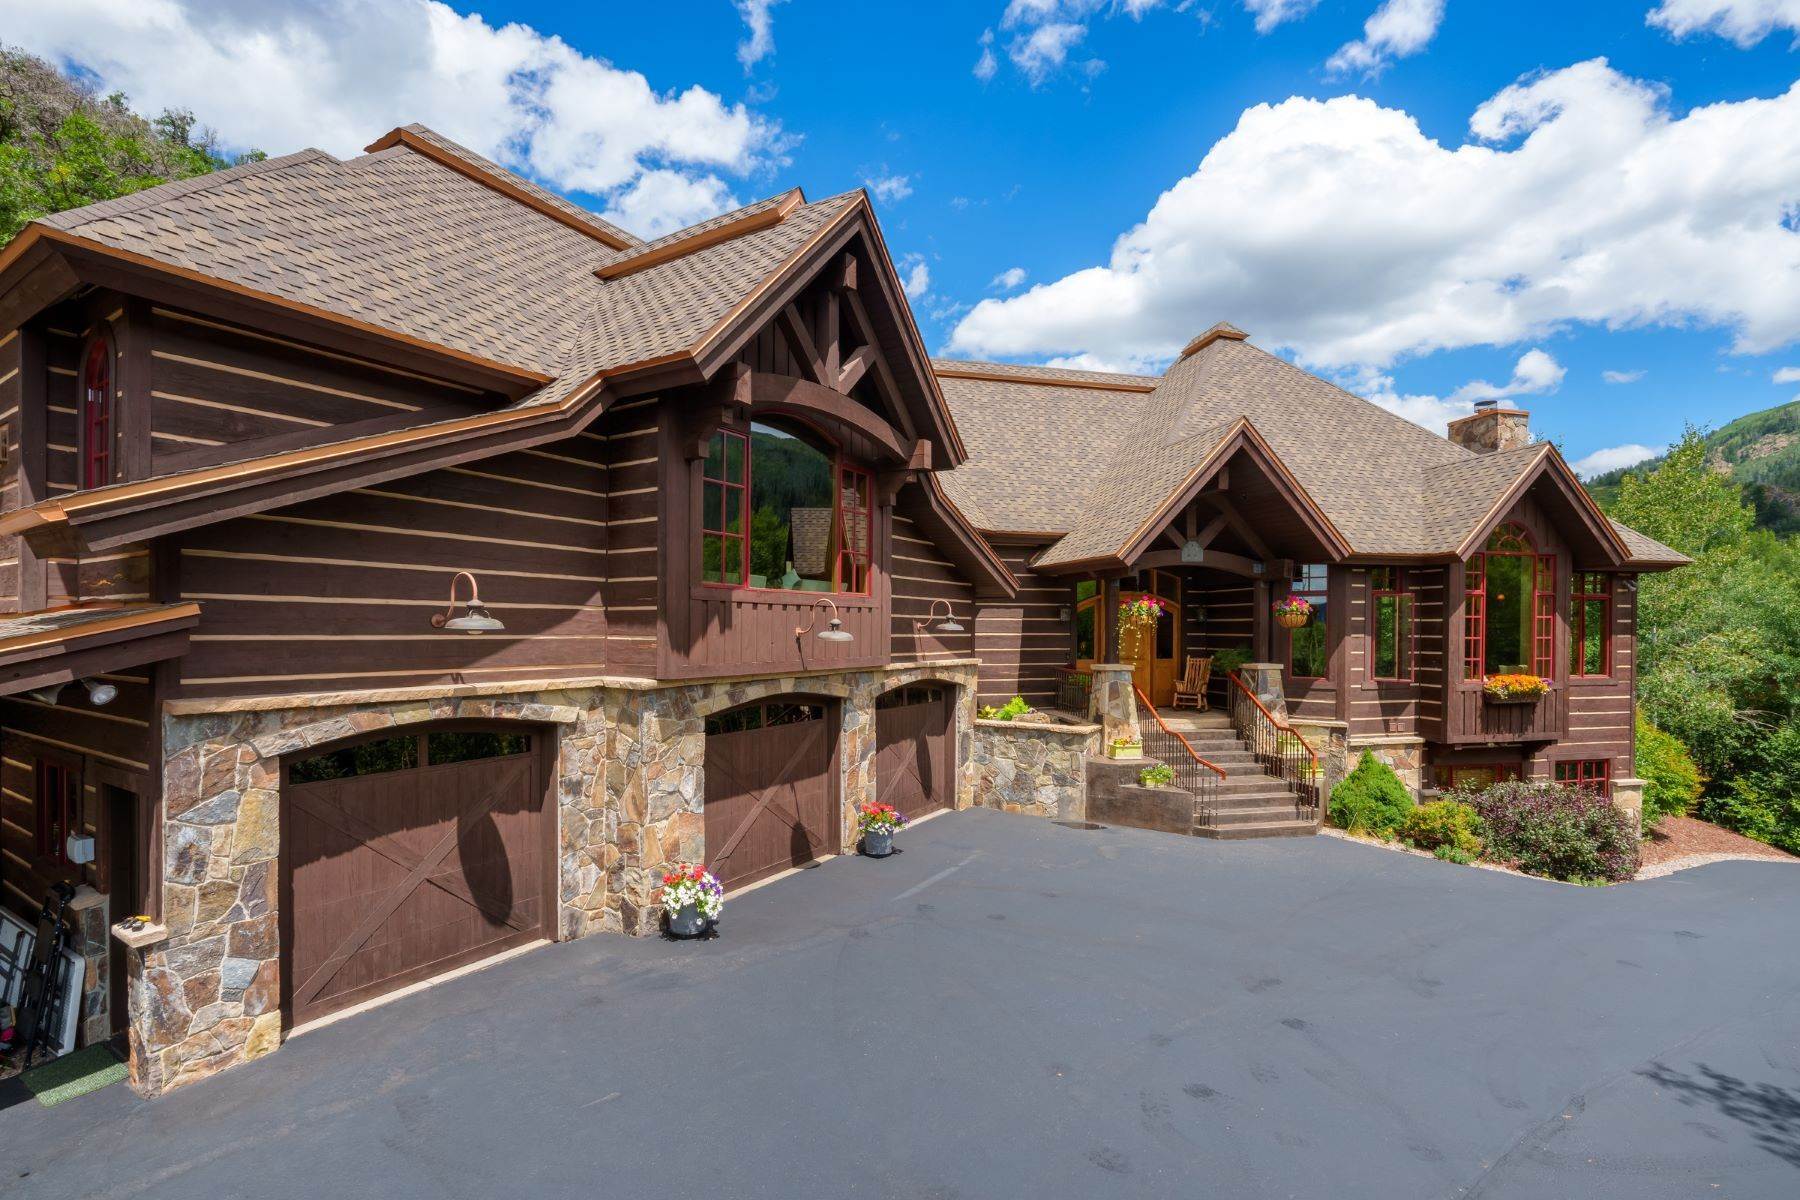 Single Family Homes for Sale at 3050 Clearwater Trail, Steamboat Springs, CO, 80487 3050 Clearwater Trail Steamboat Springs, Colorado 80487 United States